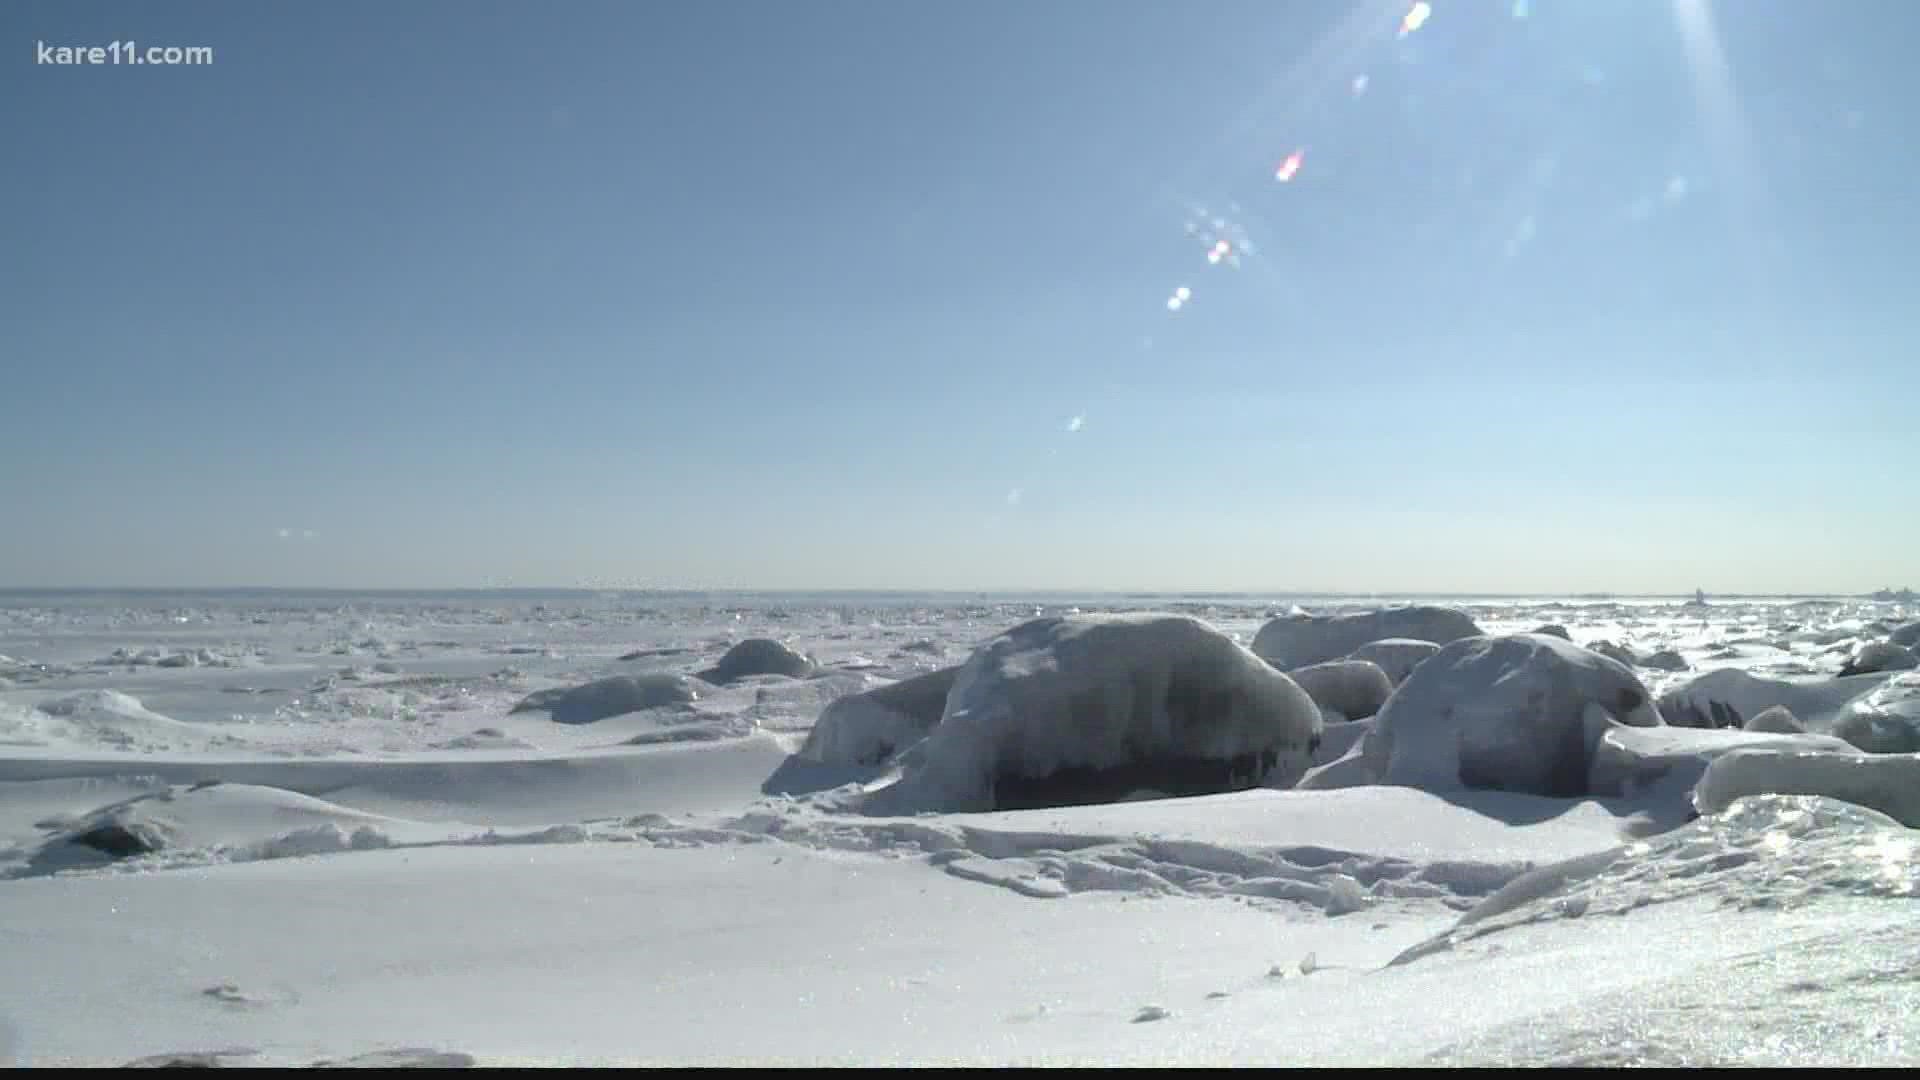 KARE 11 meteorologist Ben Dery looks at Lake Superior's ice coverage and how it can fluctuate from year to year.